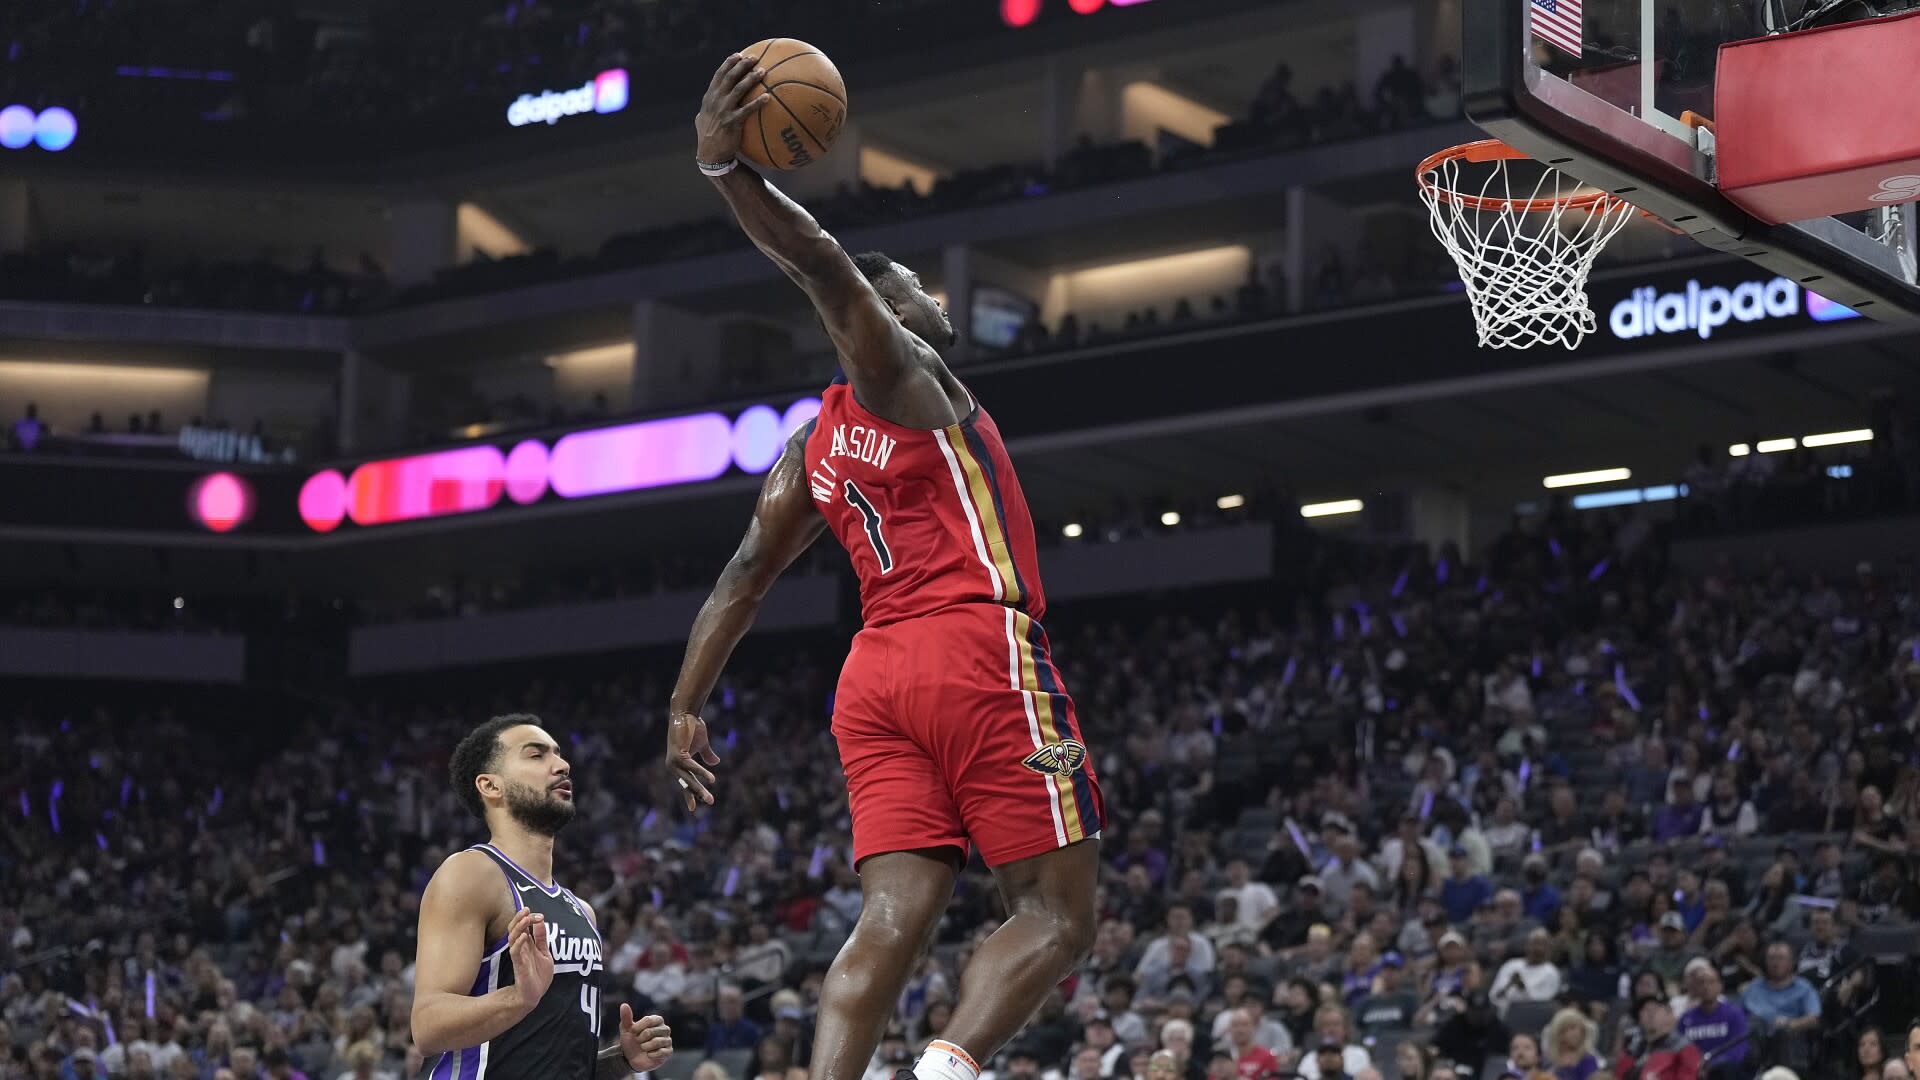 McCollum, Zion score 31 apiece, Pelicans hold on to No. 6 seed with win against Kings